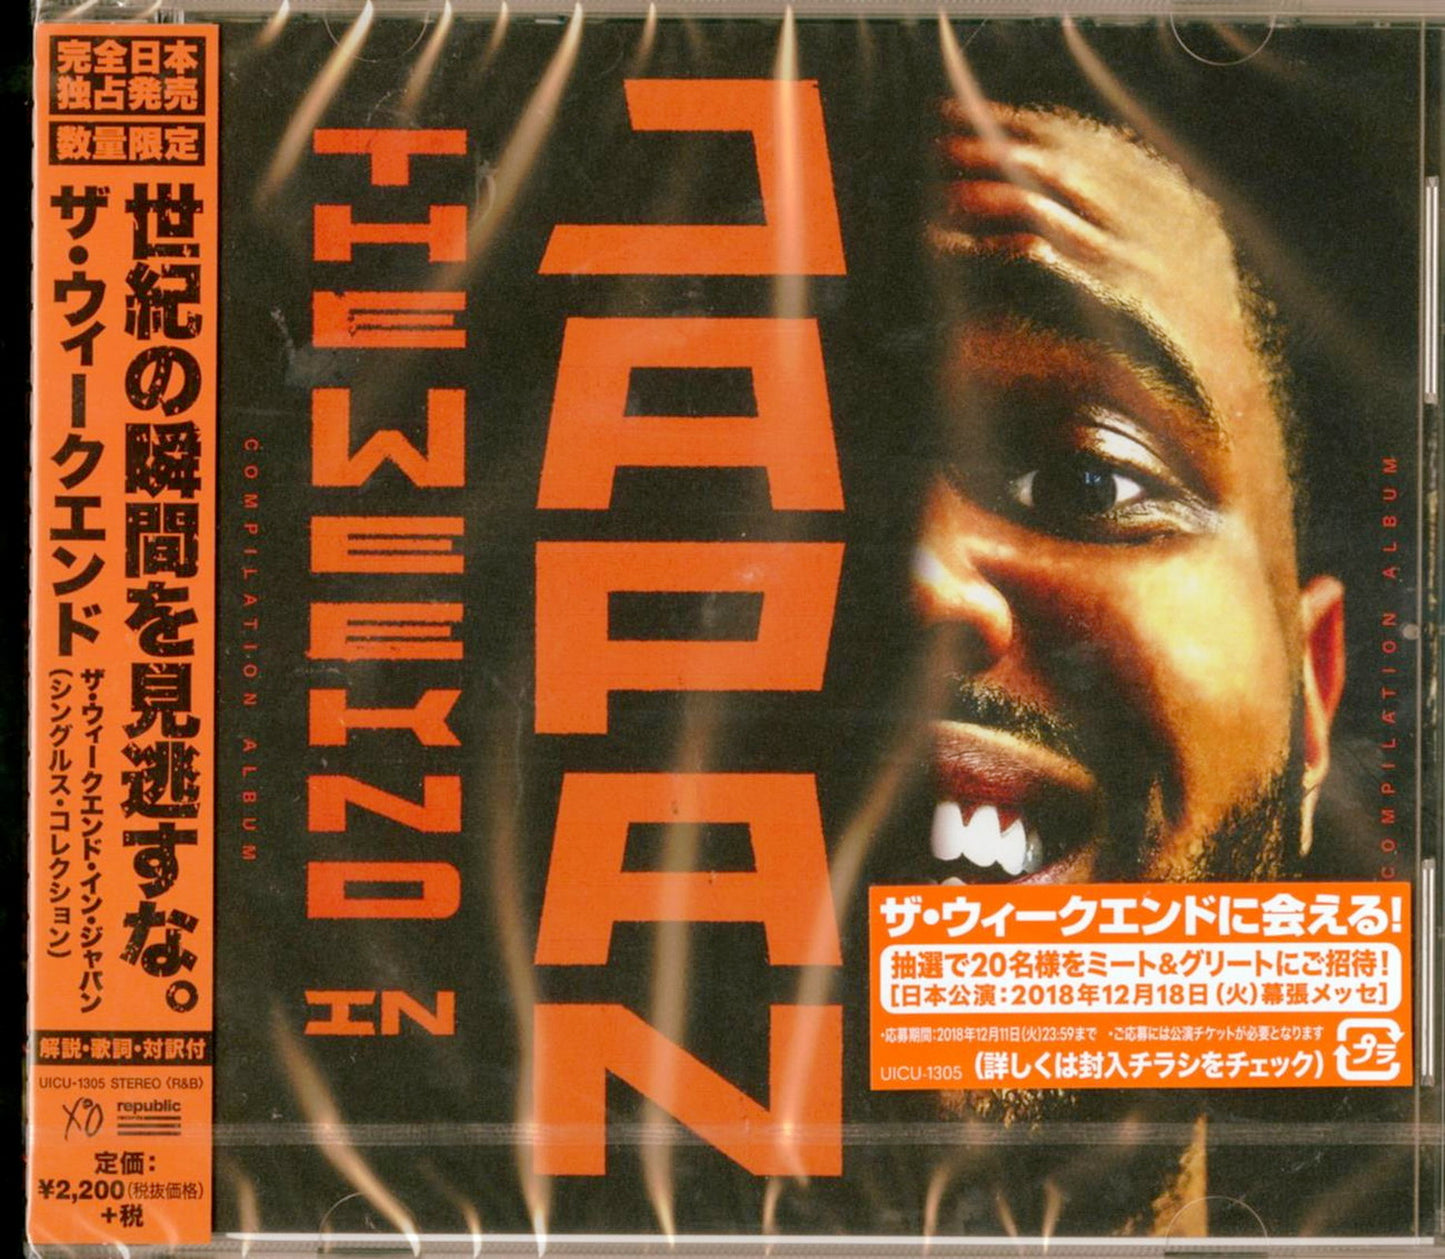 The Weeknd - The Weeknd In Japan - Limited Edition